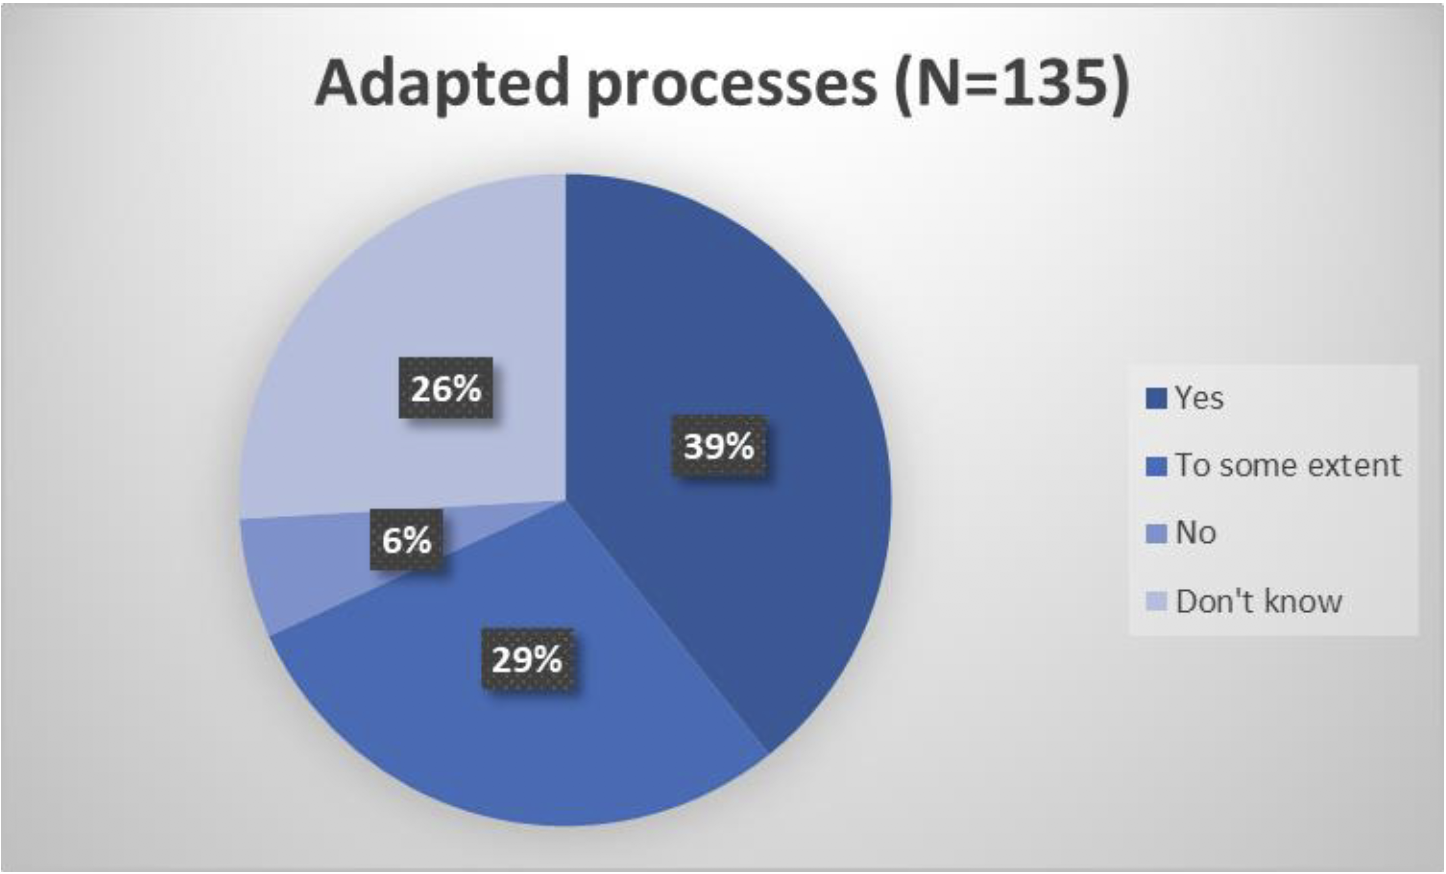 Pie chart showing whether respondents felt adapted processes due to COVID-19 should be continued:
Yes 39%
To some extent 29%
No 6%
Don't know 26%